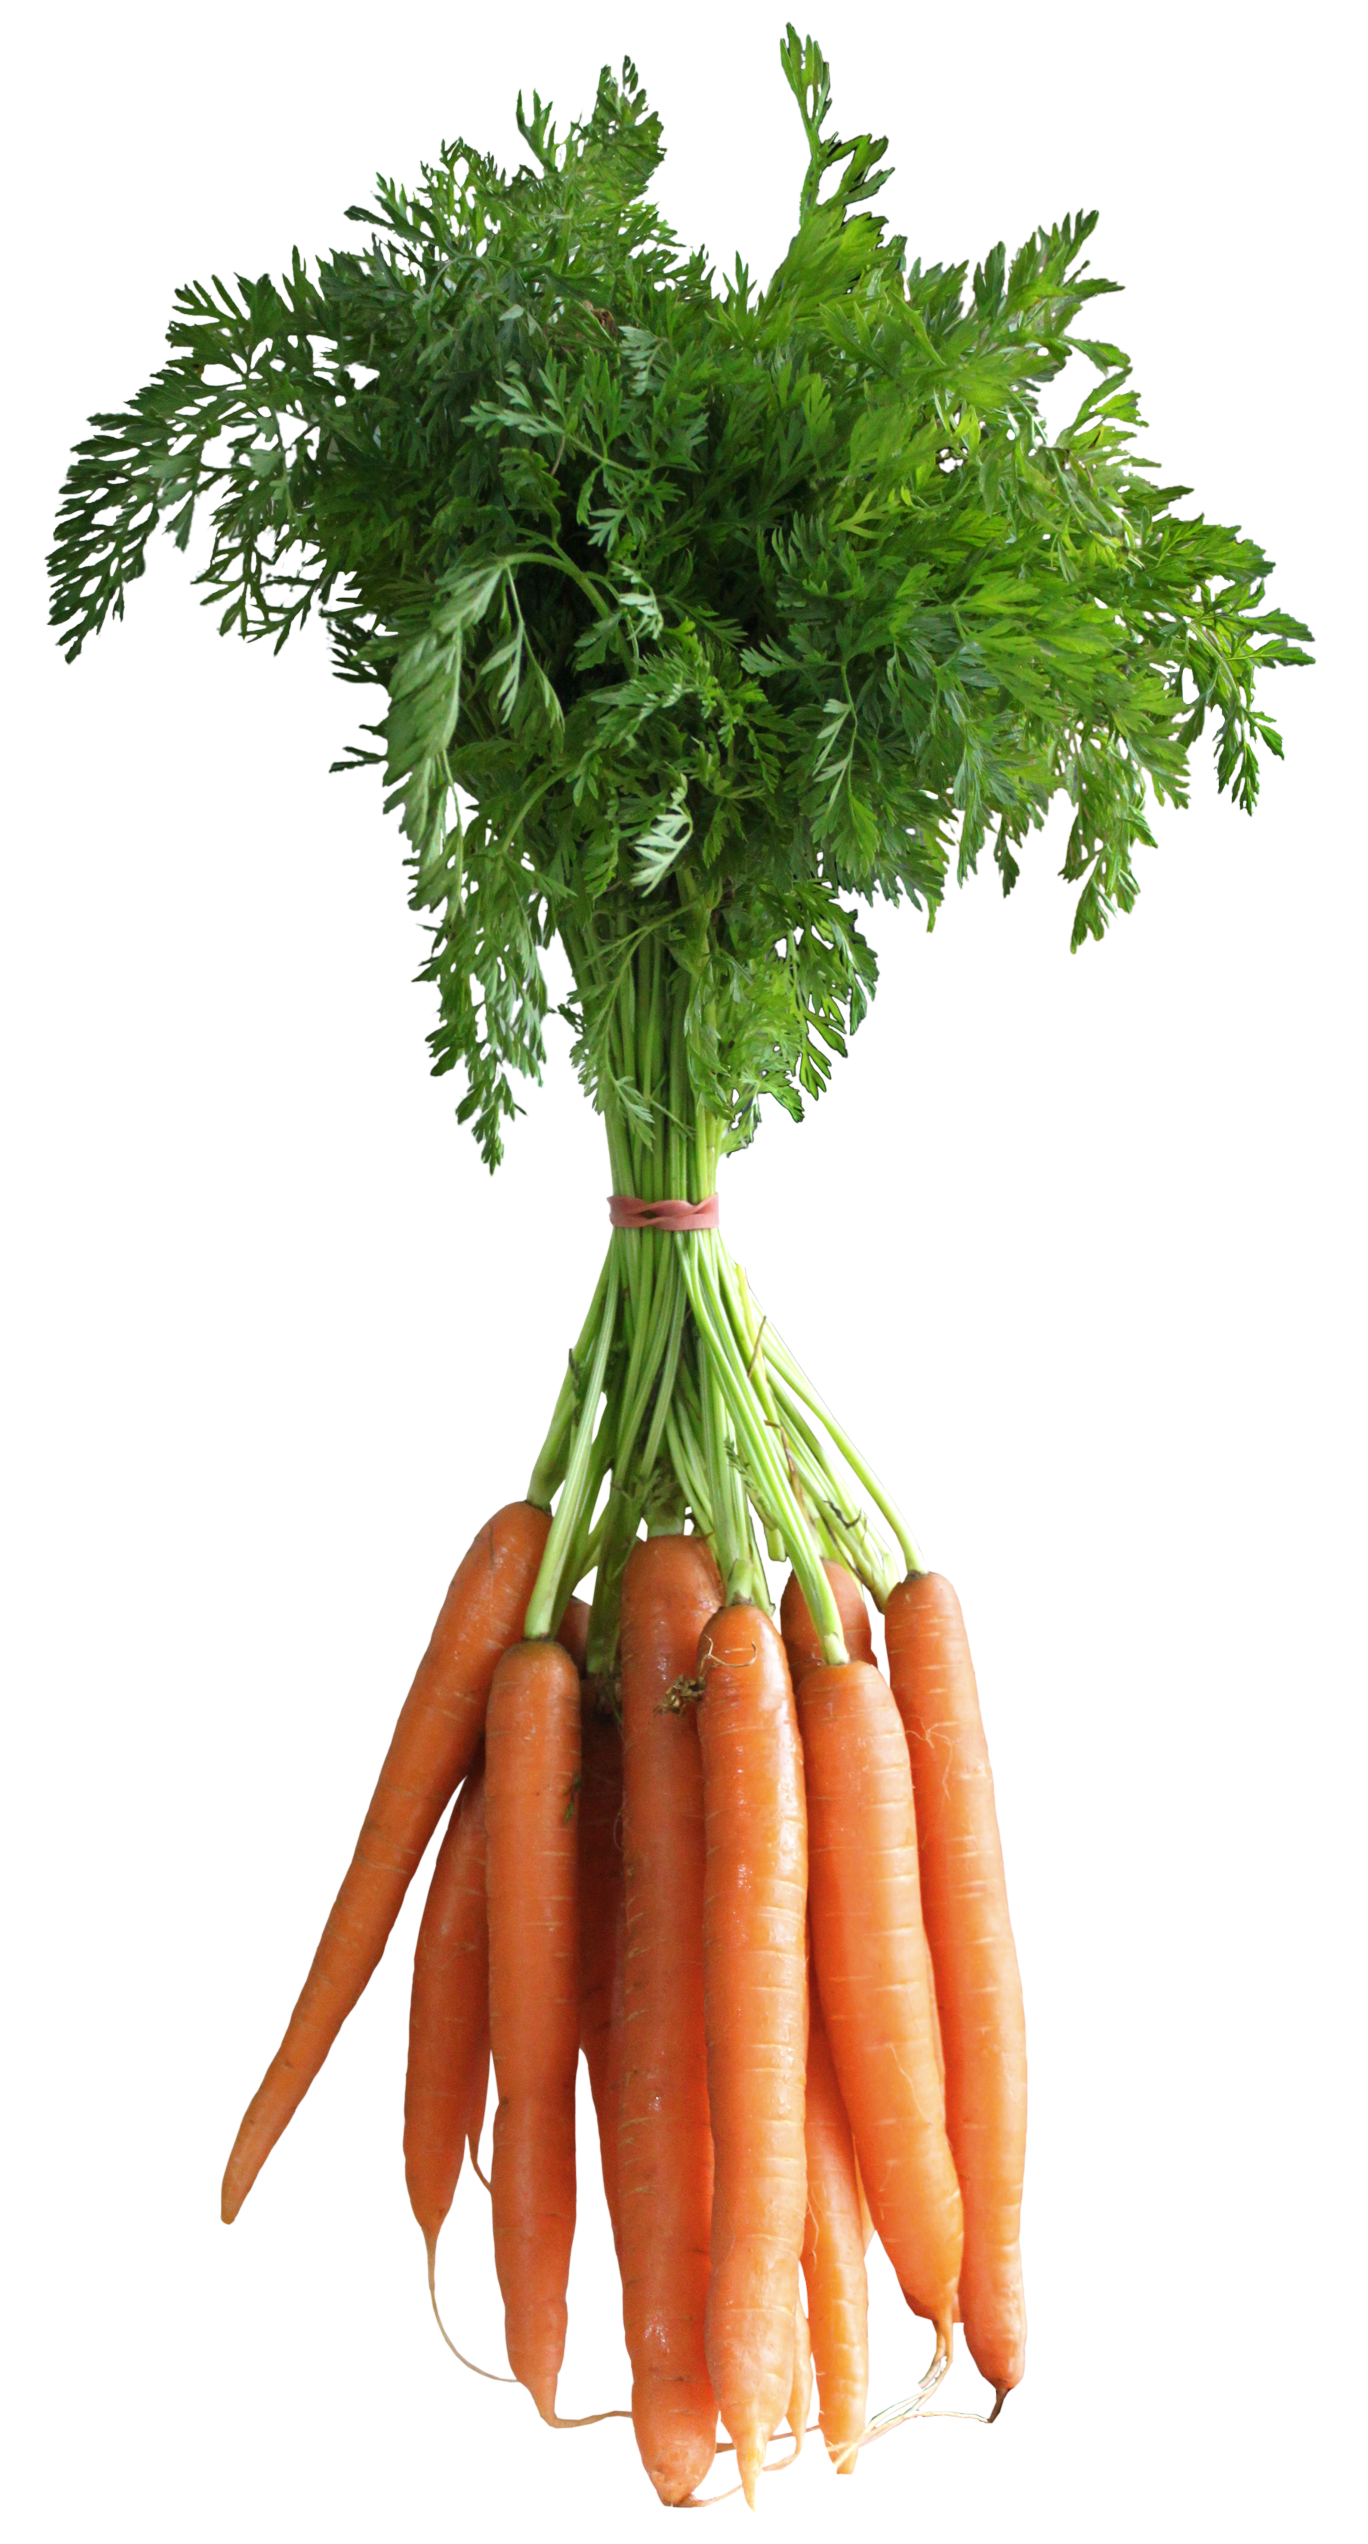 Carrot PNG Transparent Images | PNG All